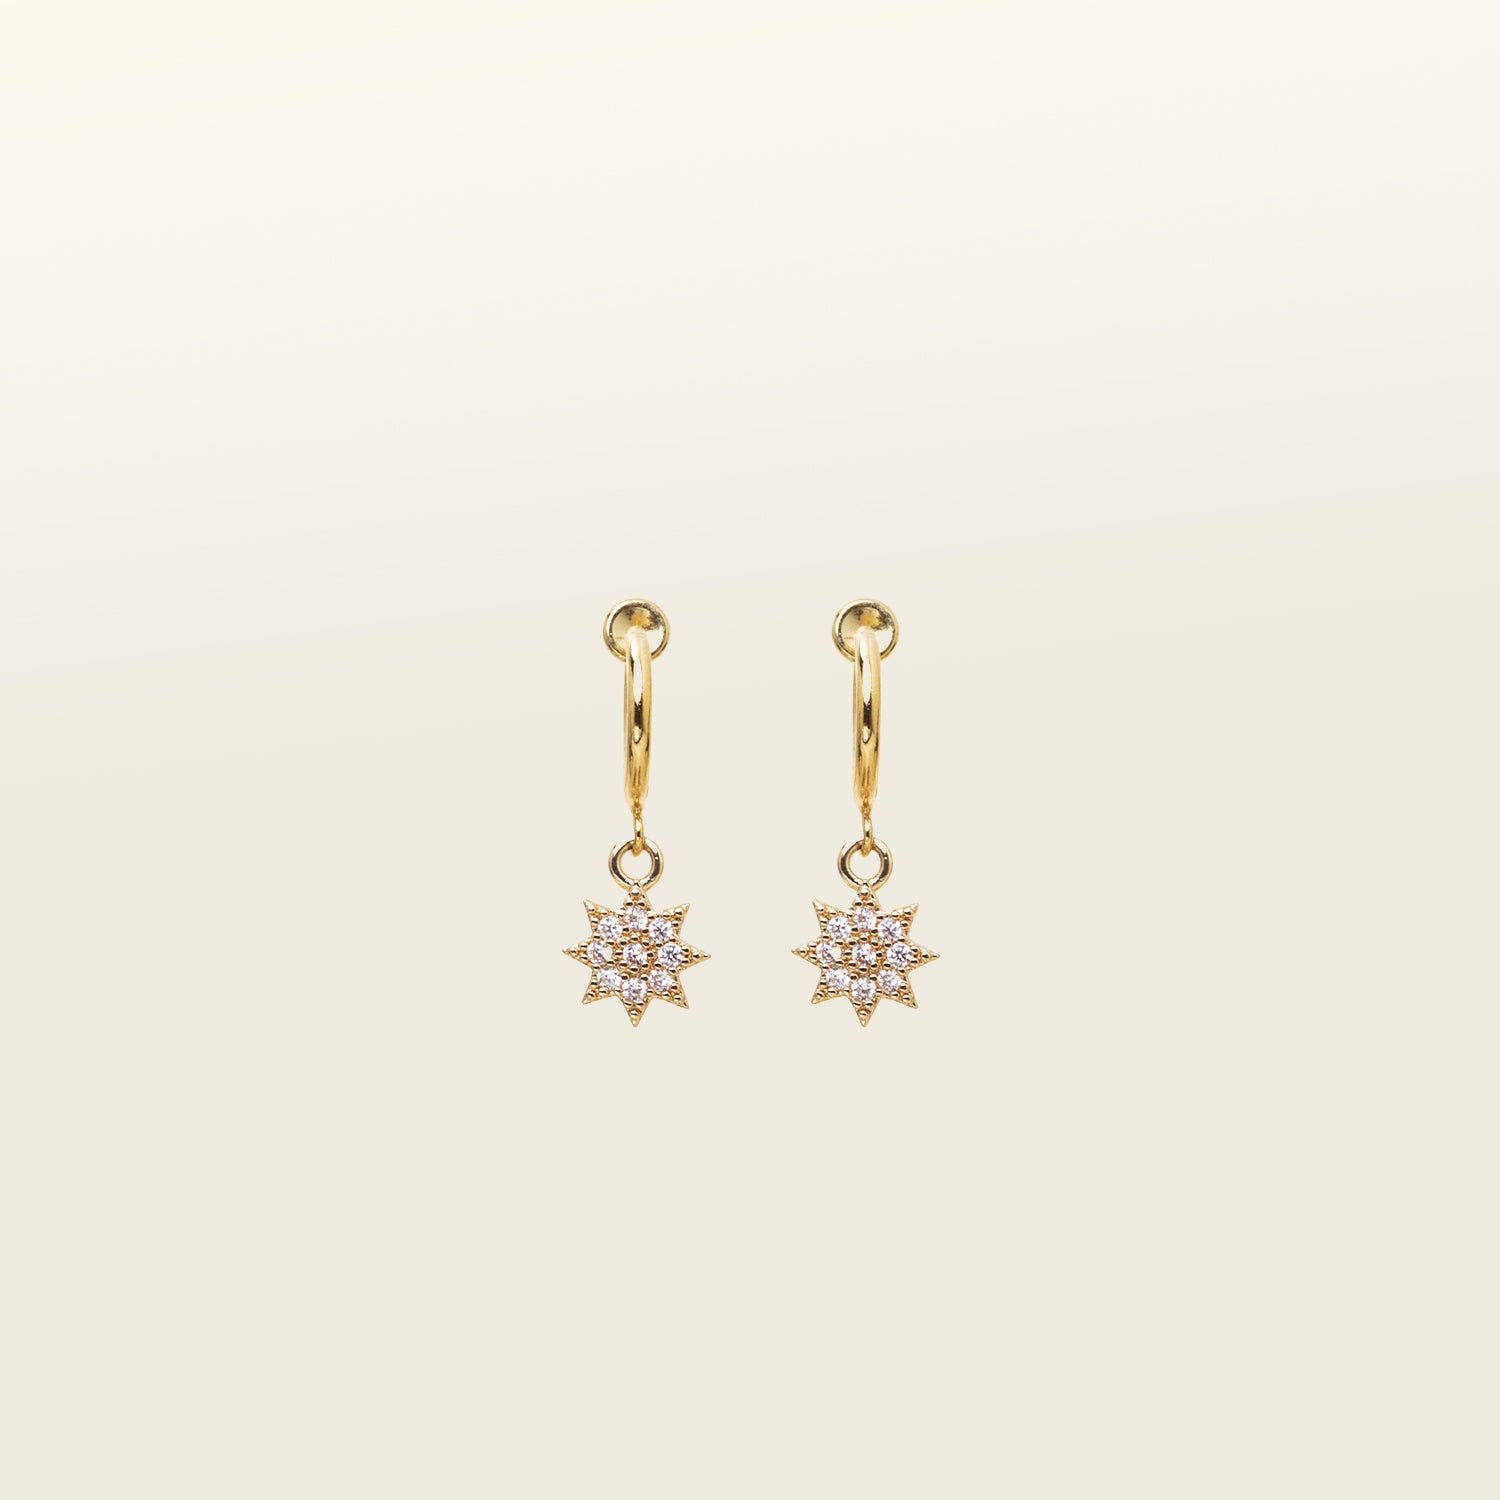 Image of the Star Charm Clip On Earring is designed with a sliding spring mechanism, ideal for those with smaller or thinner ear lobes. You can rely on a secure hold that can adjust to your ear thickness. Wear these earrings comfortably for 2 - 4 hours. Crafted from brass and cubic zirconia, this earring is sold as a single pair.